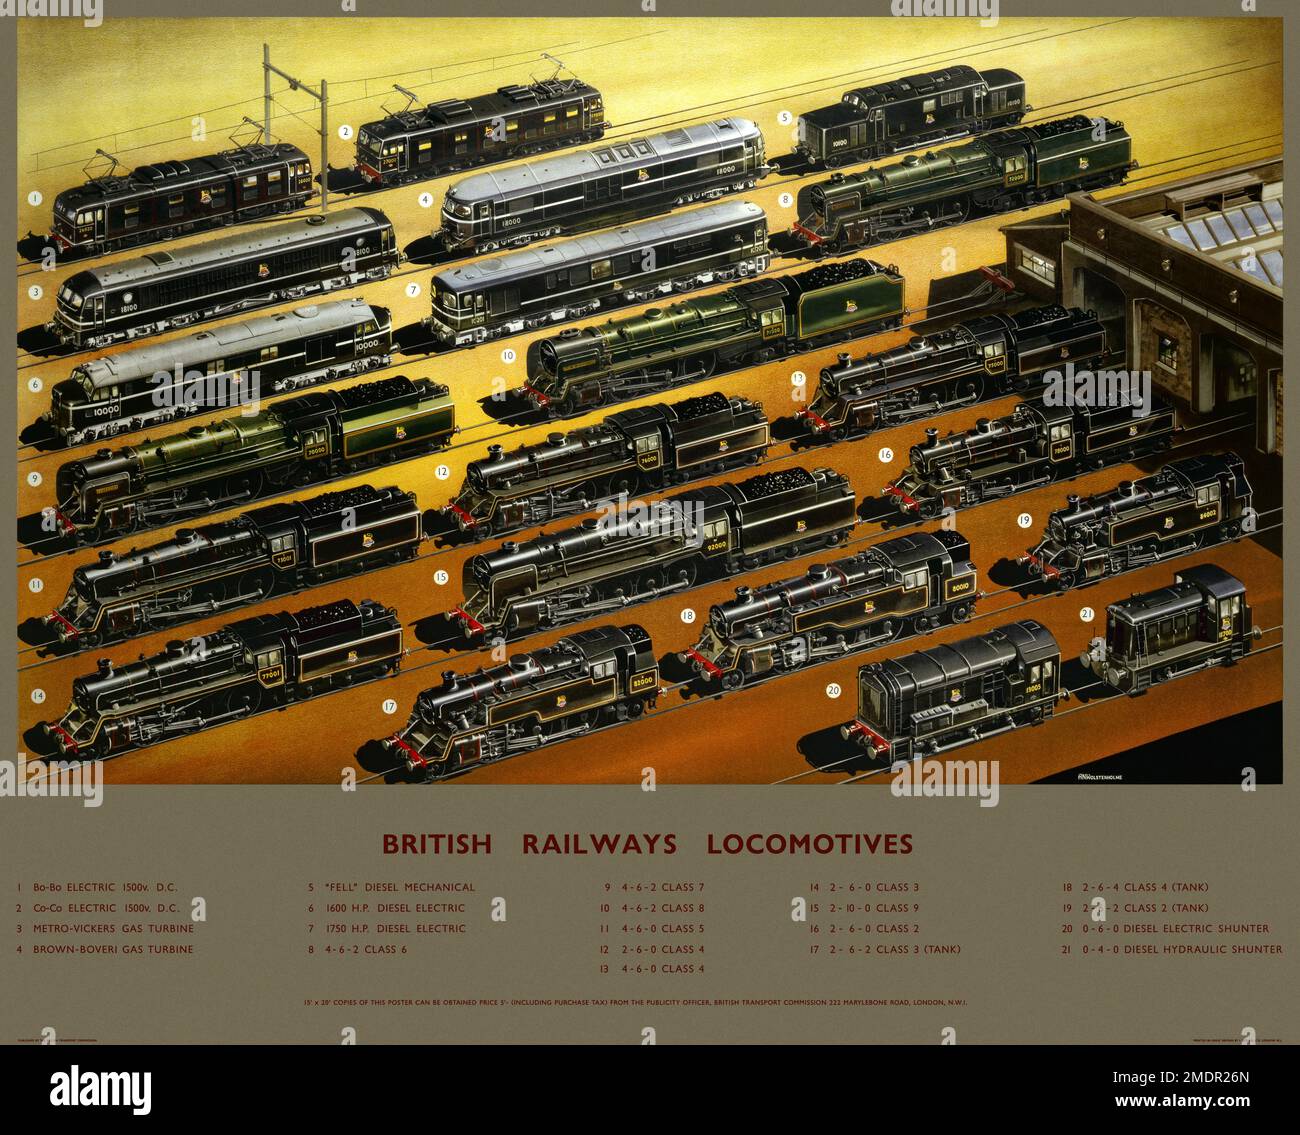 British Railways Locomotives by Arthur Nigel Wolstenholme (1920-2002). Poster published in 1956 in the UK. Stock Photo